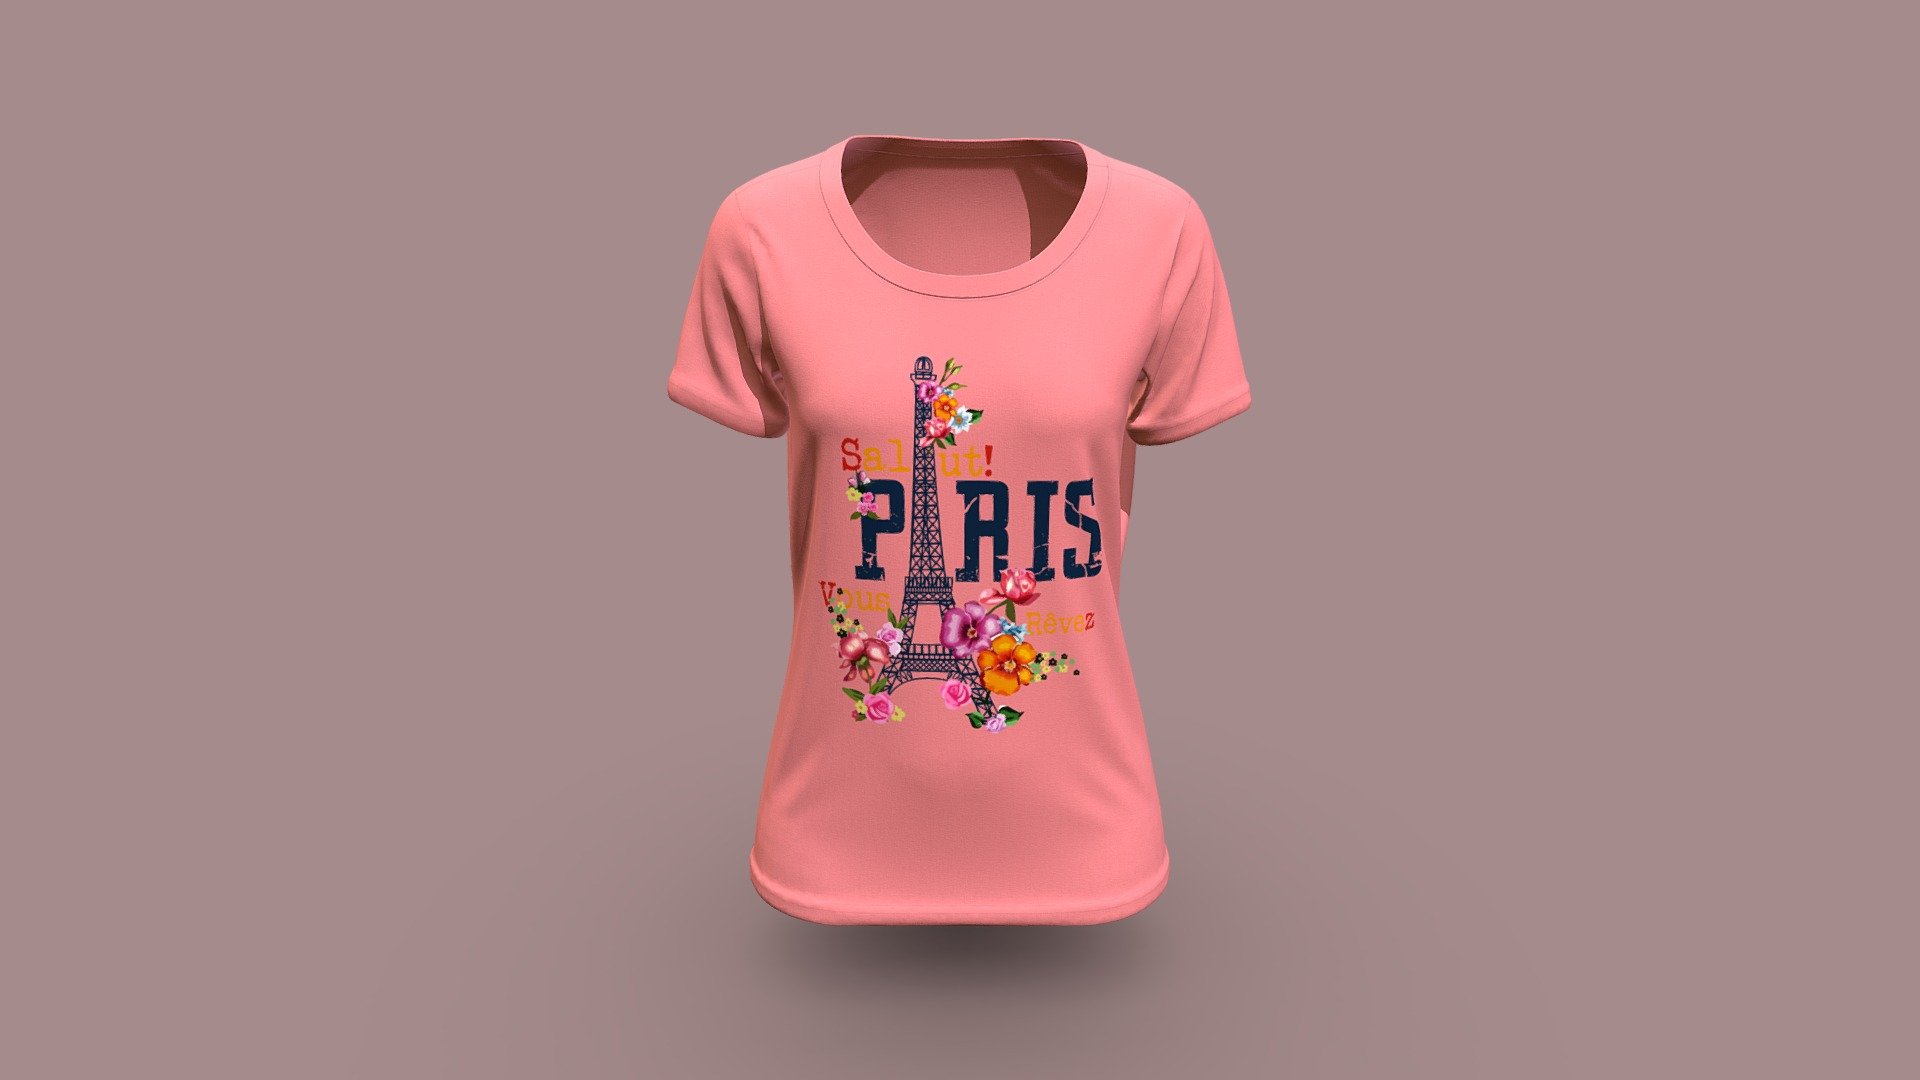 Cloth Title = Short Sleeve T- Shirt Design 

SKU = DG100149 

Category = Women 

Product Type = T-Shirt 

Cloth Length = Regular 

Body Fit = Regular Fit 

Occasion = Casual 
 
Sleeve Style = Set In Sleeve 


Our Services:

3D Apparel Design.

OBJ,FBX,GLTF Making with High/Low Poly.

Fabric Digitalization.

Mockup making.

3D Teck Pack.

Pattern Making.

2D Illustration.

Cloth Animation and 360 Spin Video.


Contact us:- 

Email: info@digitalfashionwear.com 

Website: https://digitalfashionwear.com 


We designed all the types of cloth specially focused on product visualization, e-commerce, fitting, and production. 

We will design: 

T-shirts 

Polo shirts 

Hoodies 

Sweatshirt 

Jackets 

Shirts 

TankTops 

Trousers 

Bras 

Underwear 

Blazer 

Aprons 

Leggings 

and All Fashion items. 





Our goal is to make sure what we provide you, meets your demand 3d model